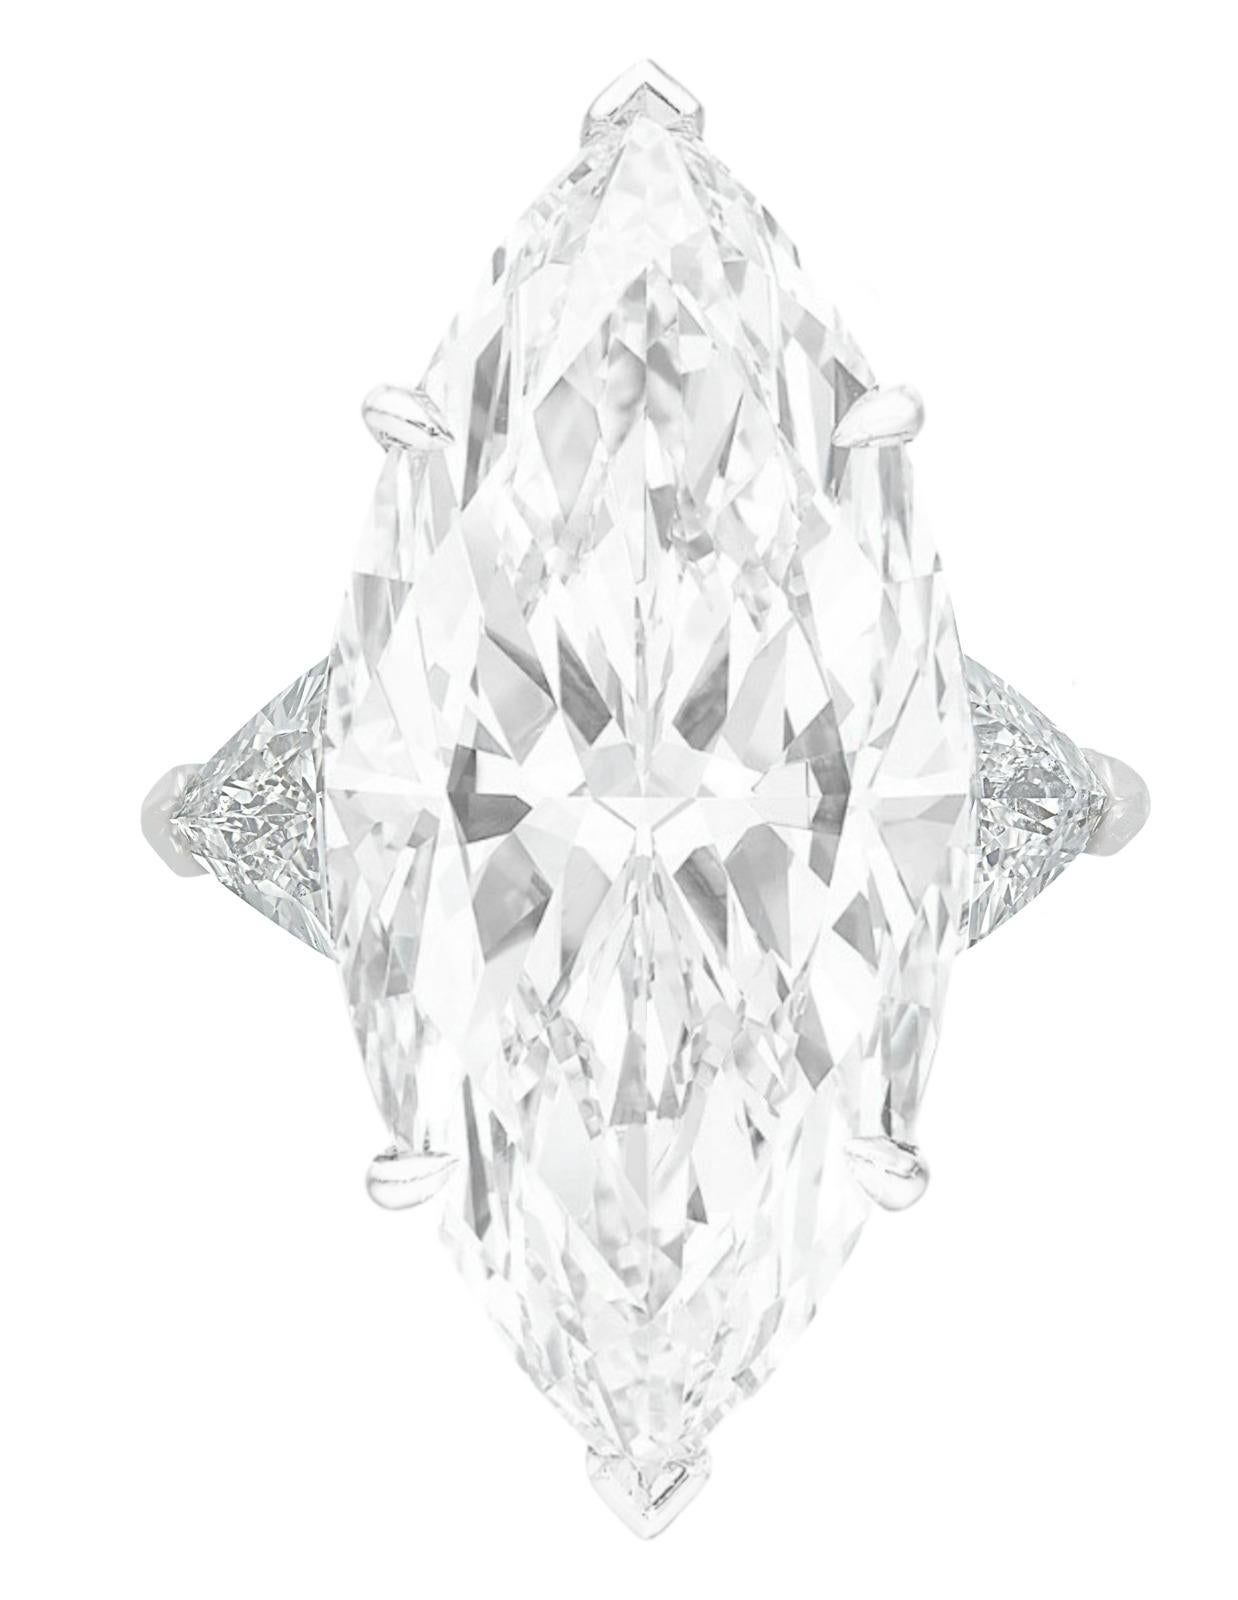 This magnificent diamond from Antinori di Sanpietro ROMA is a treasure beyond description... The 3.carat marquise cut diamond of D color and SI1 clarity is set in a handmade, platinum ring mounting with beautifully matched trillion diamonds. With no